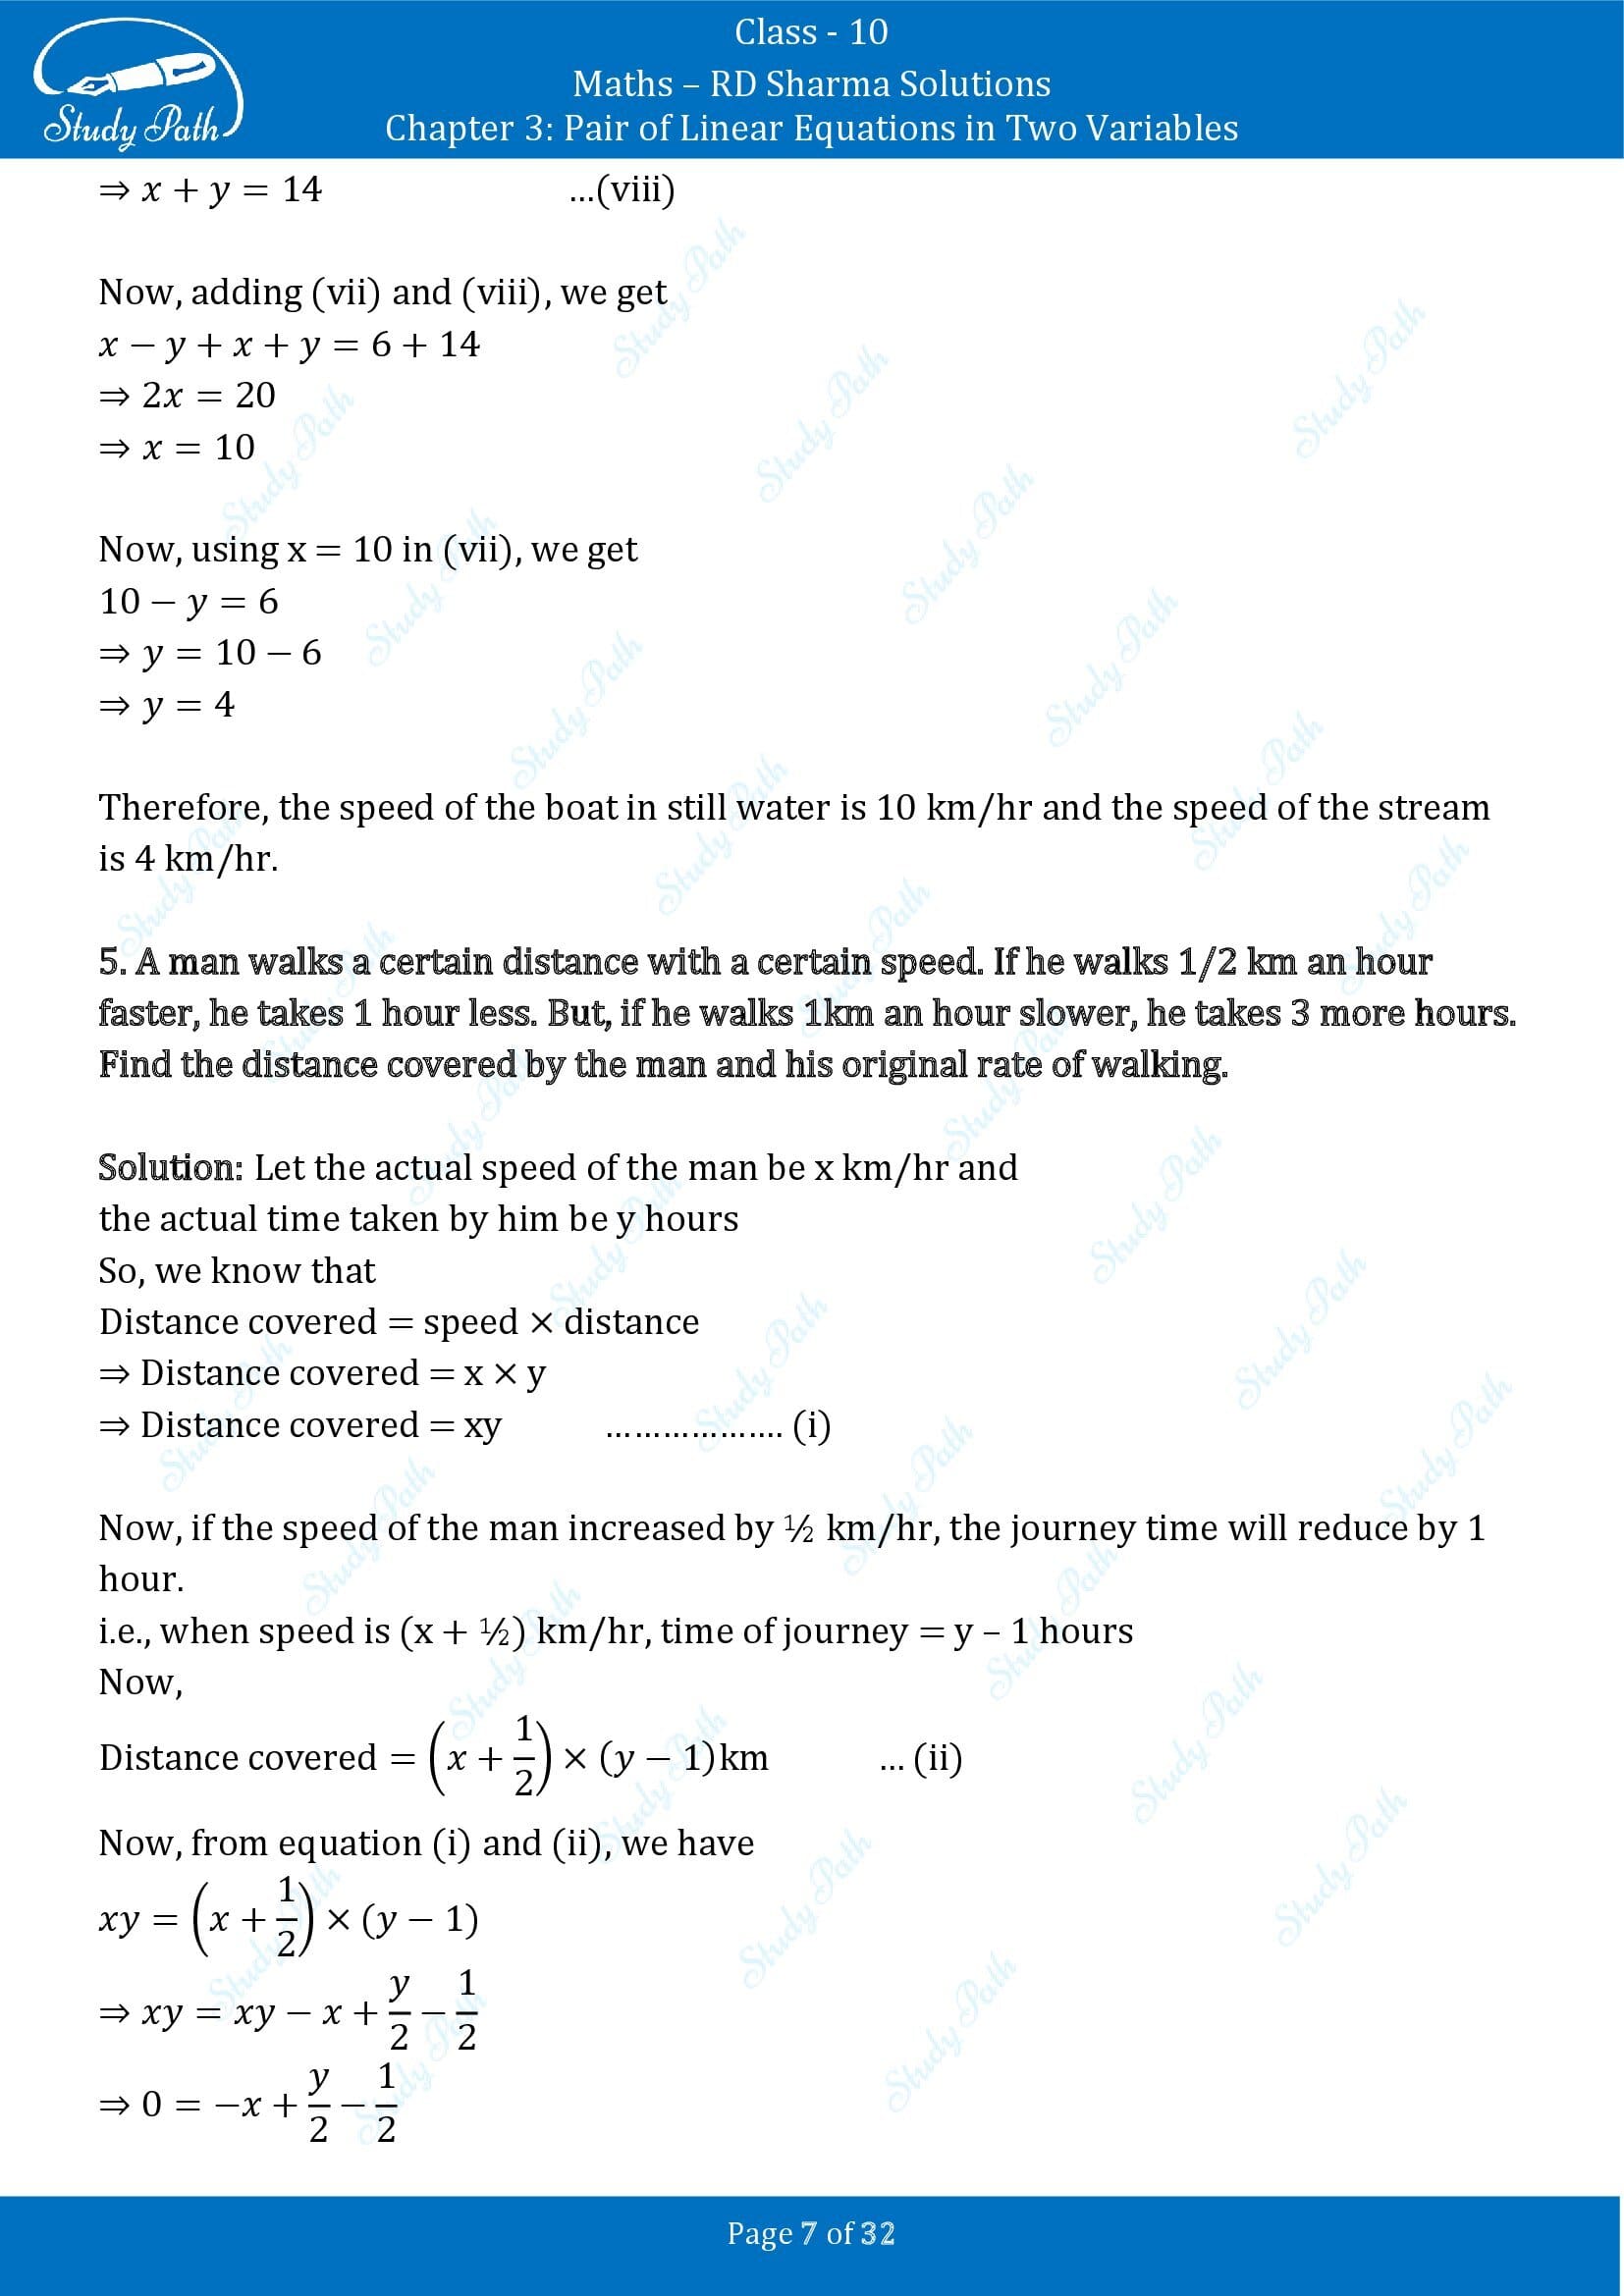 RD Sharma Solutions Class 10 Chapter 3 Pair of Linear Equations in Two Variables Exercise 3.10 00007